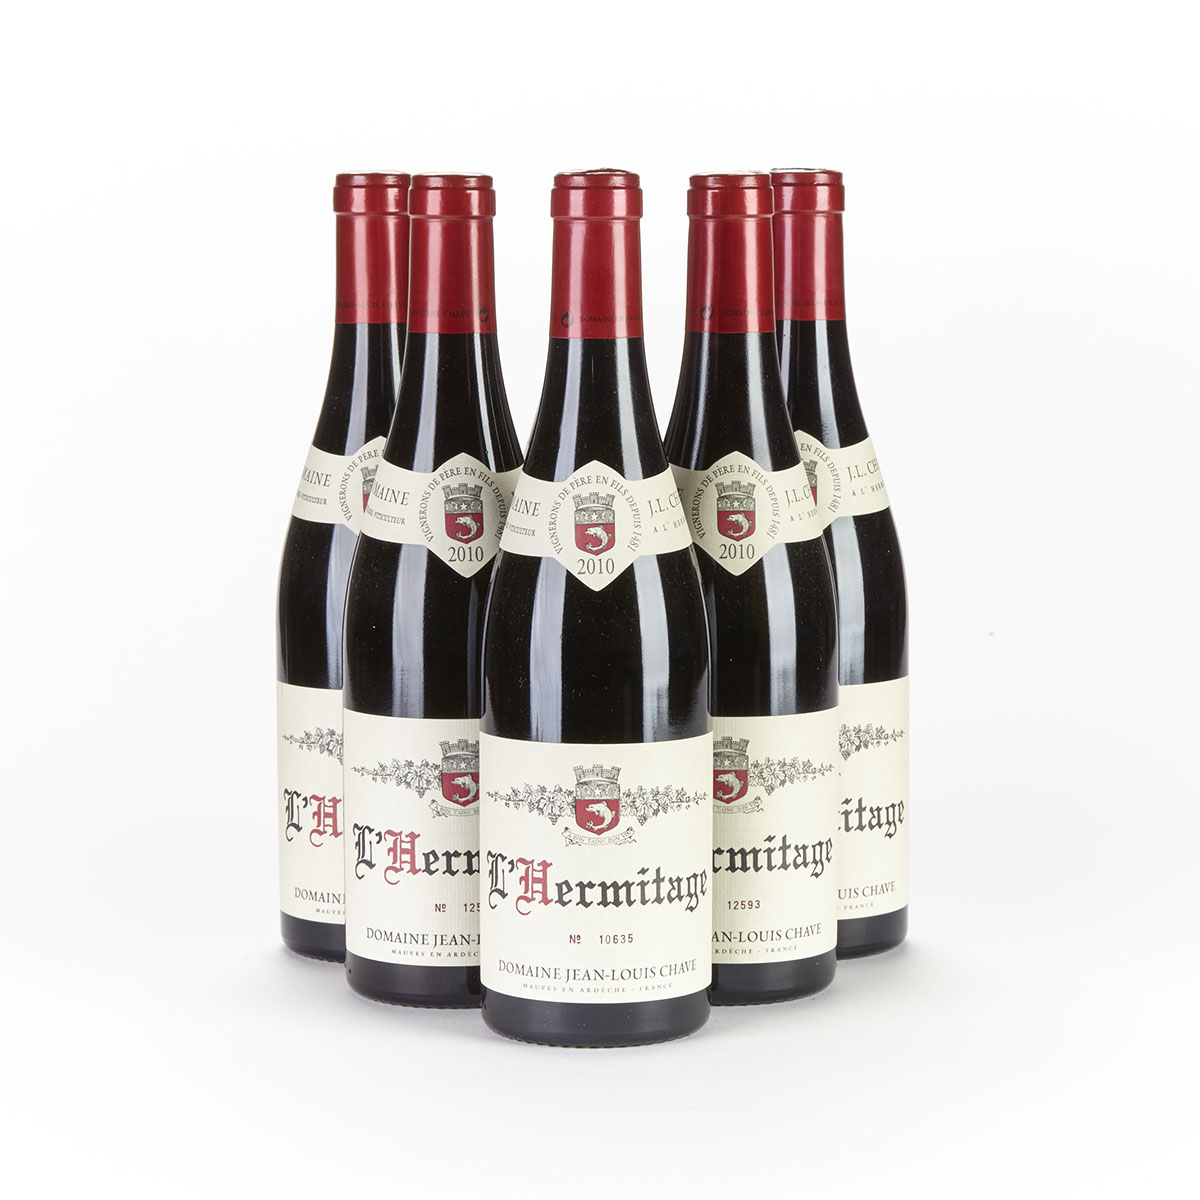 JEAN-LOUIS CHAVE HERMITAGE 2010